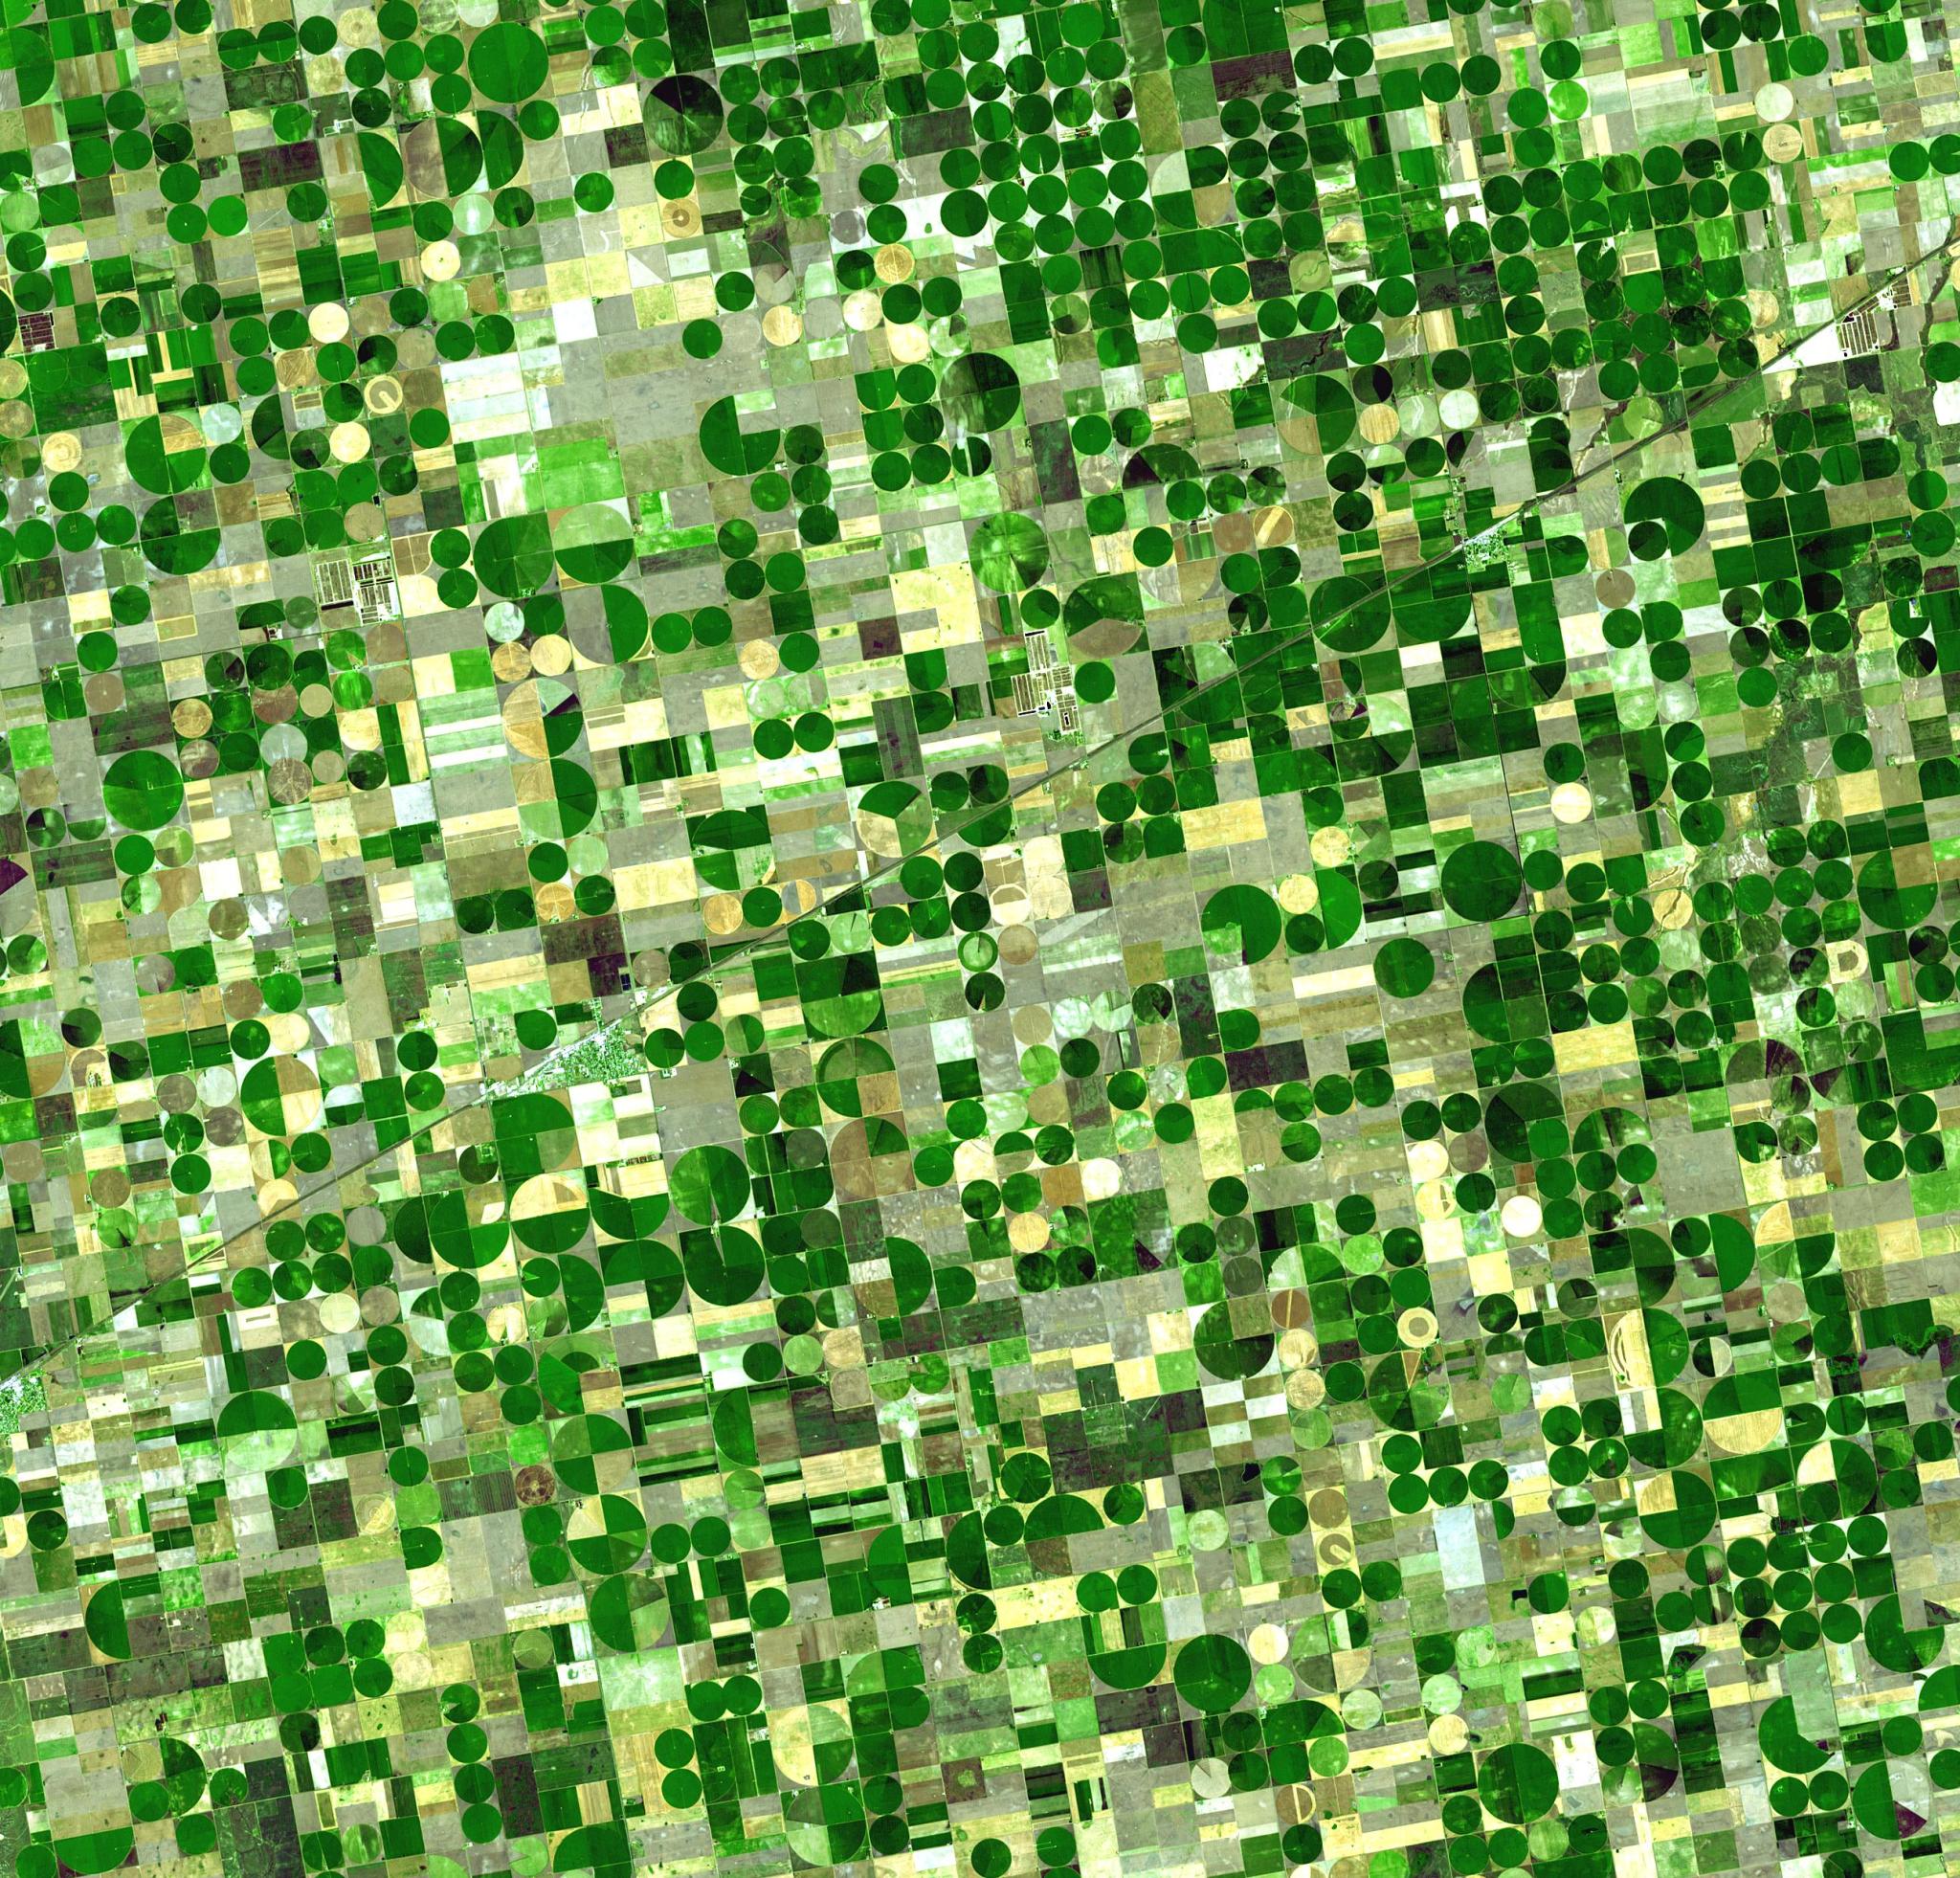 Satellite image of agriculture.